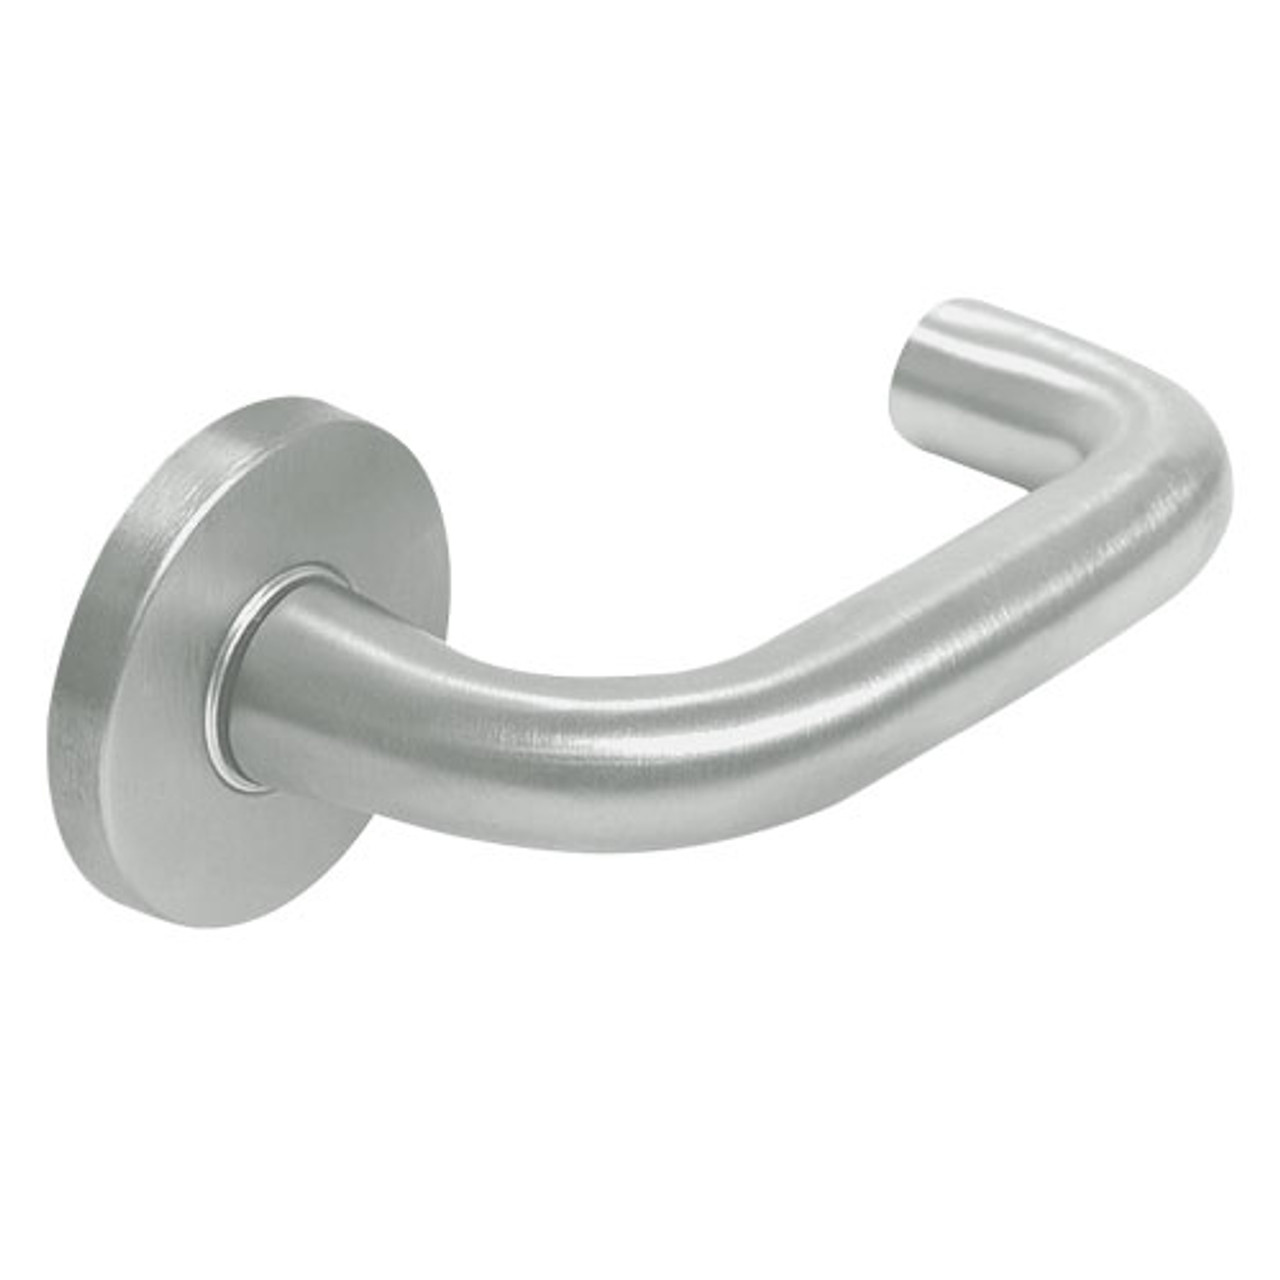 ML2042-LWF-619-M31 Corbin Russwin ML2000 Series Mortise Entrance Trim Pack with Lustra Lever in Satin Nickel